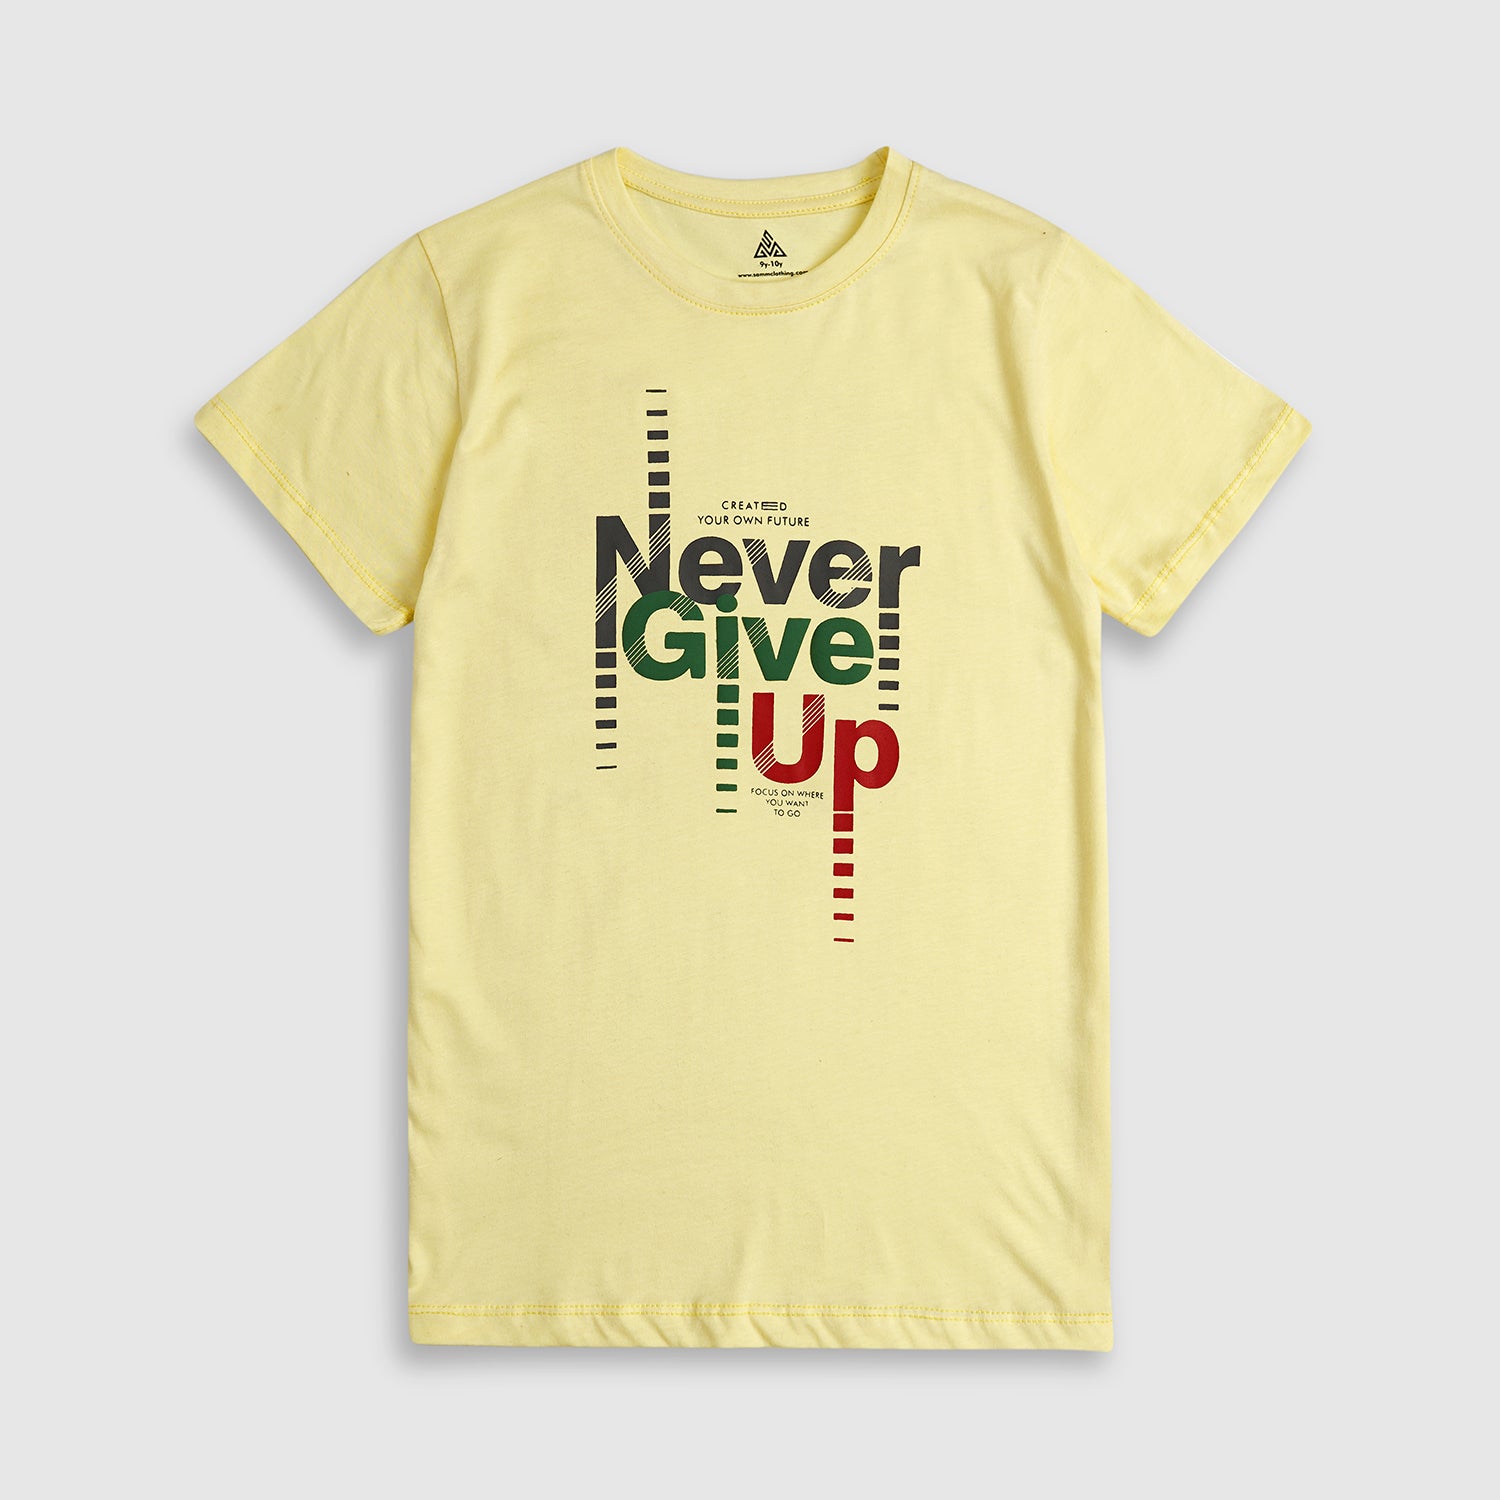 Pure Cotton " Never Give up" Graphic Tee Shirt for kids (7Yrs - 14 Yrs)